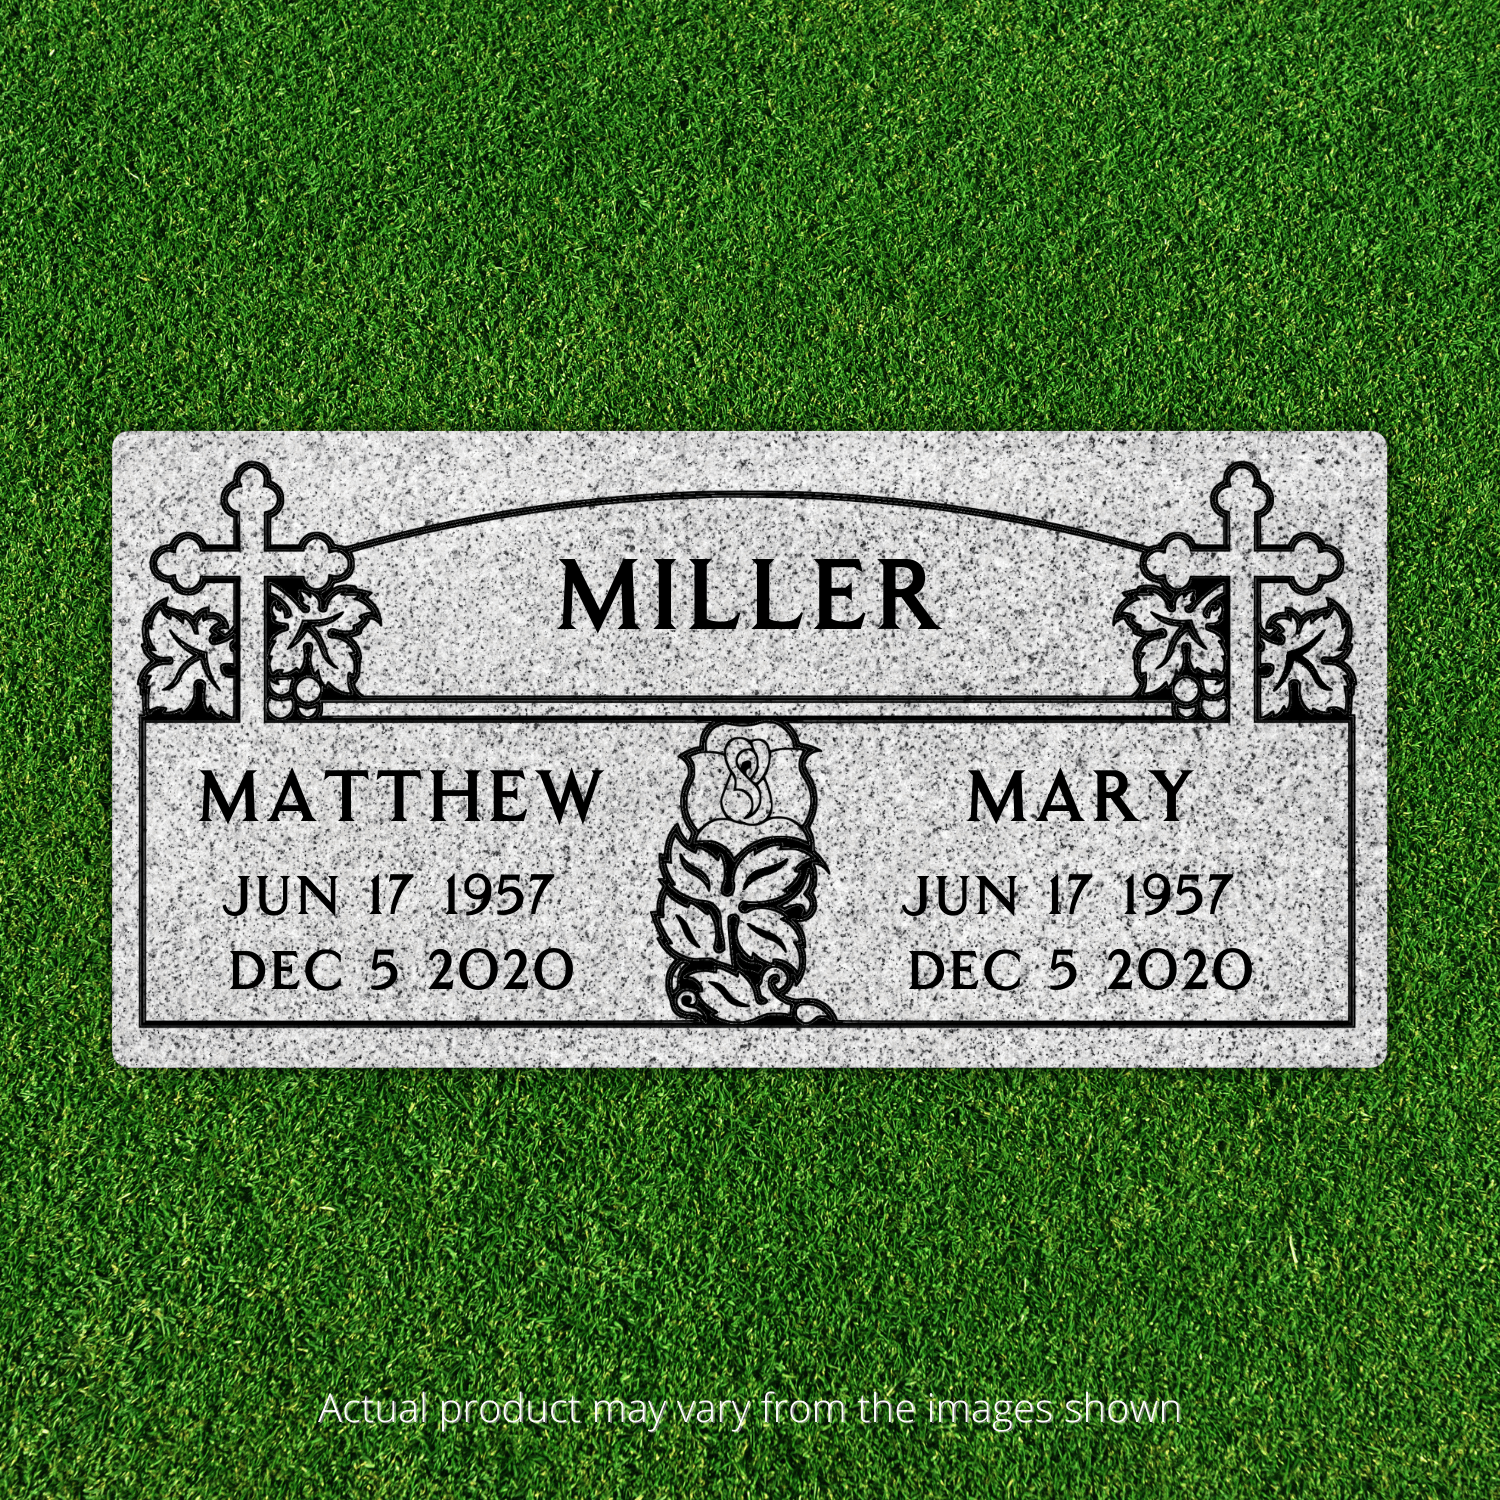 Companion Flat Headstone Marker with border - (24in x 12in x 4in) - Markers & Headstones